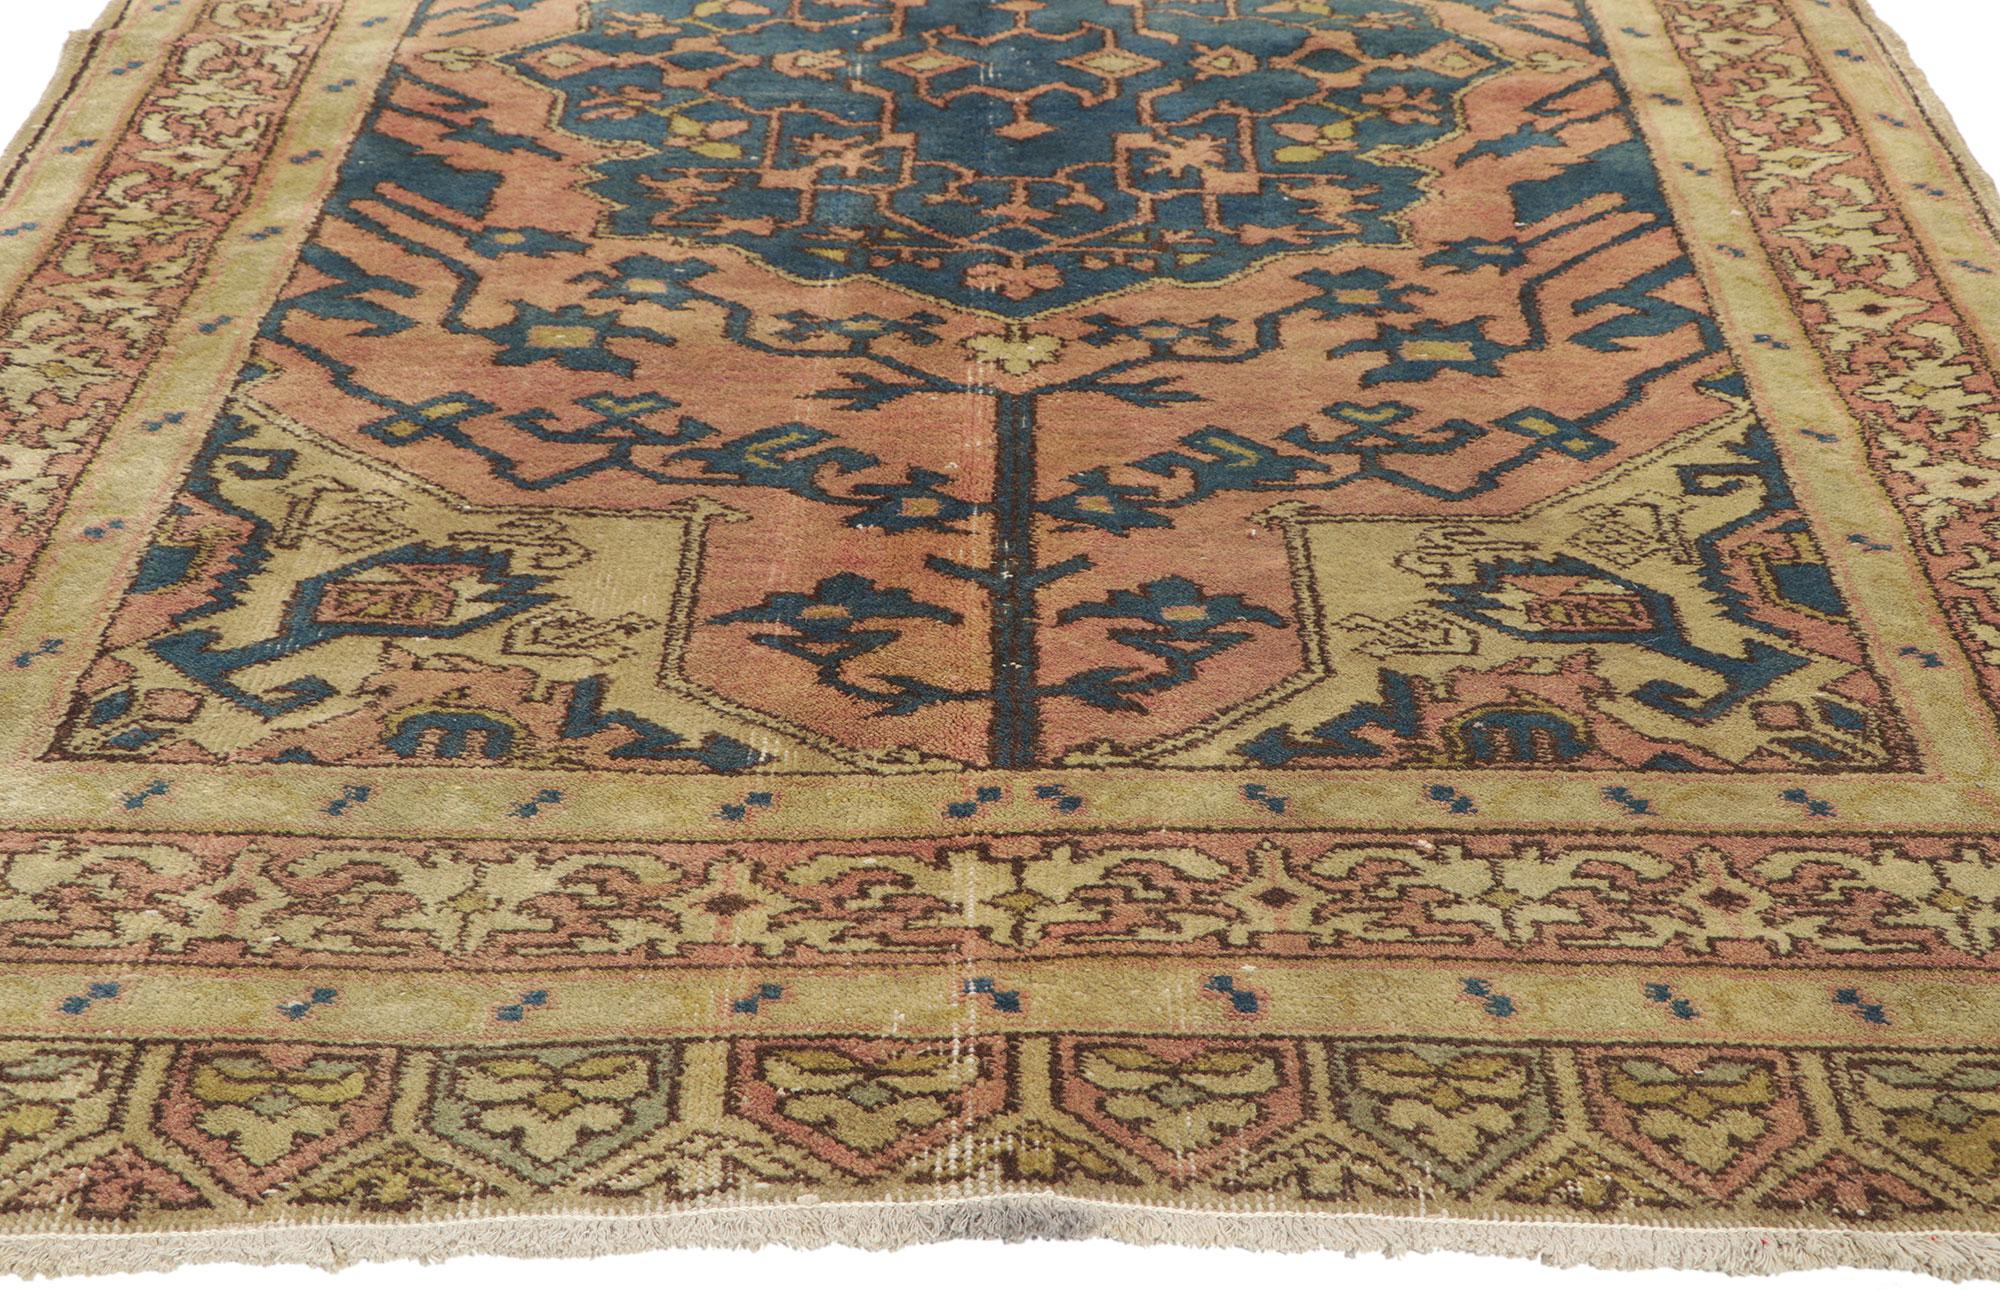 20th Century Pair of Matching Vintage Turkish Sivas Rugs with Rustic Earth-Tone Colors For Sale